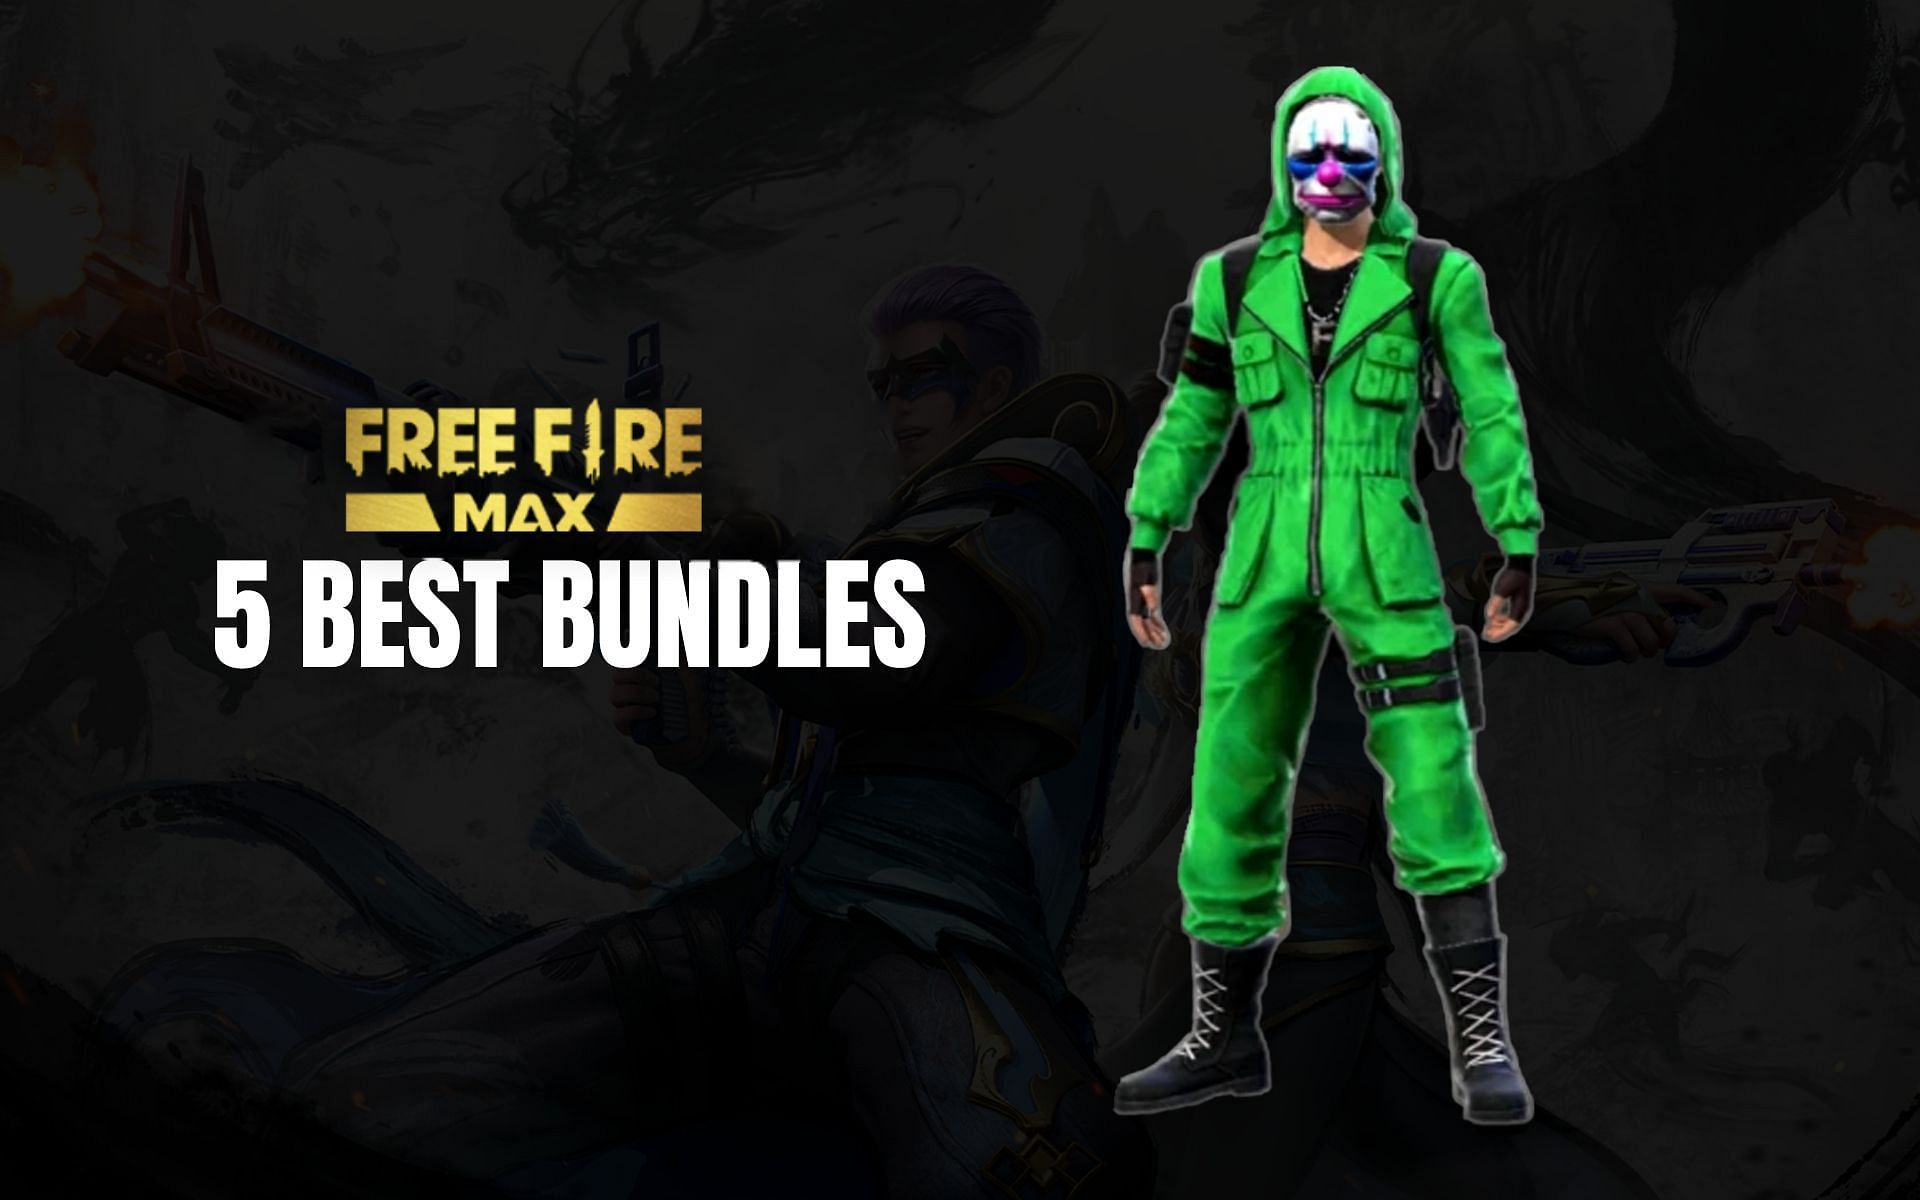 The five best Free Fire MAX bundles released by the developers (Image via Sportskeeda)